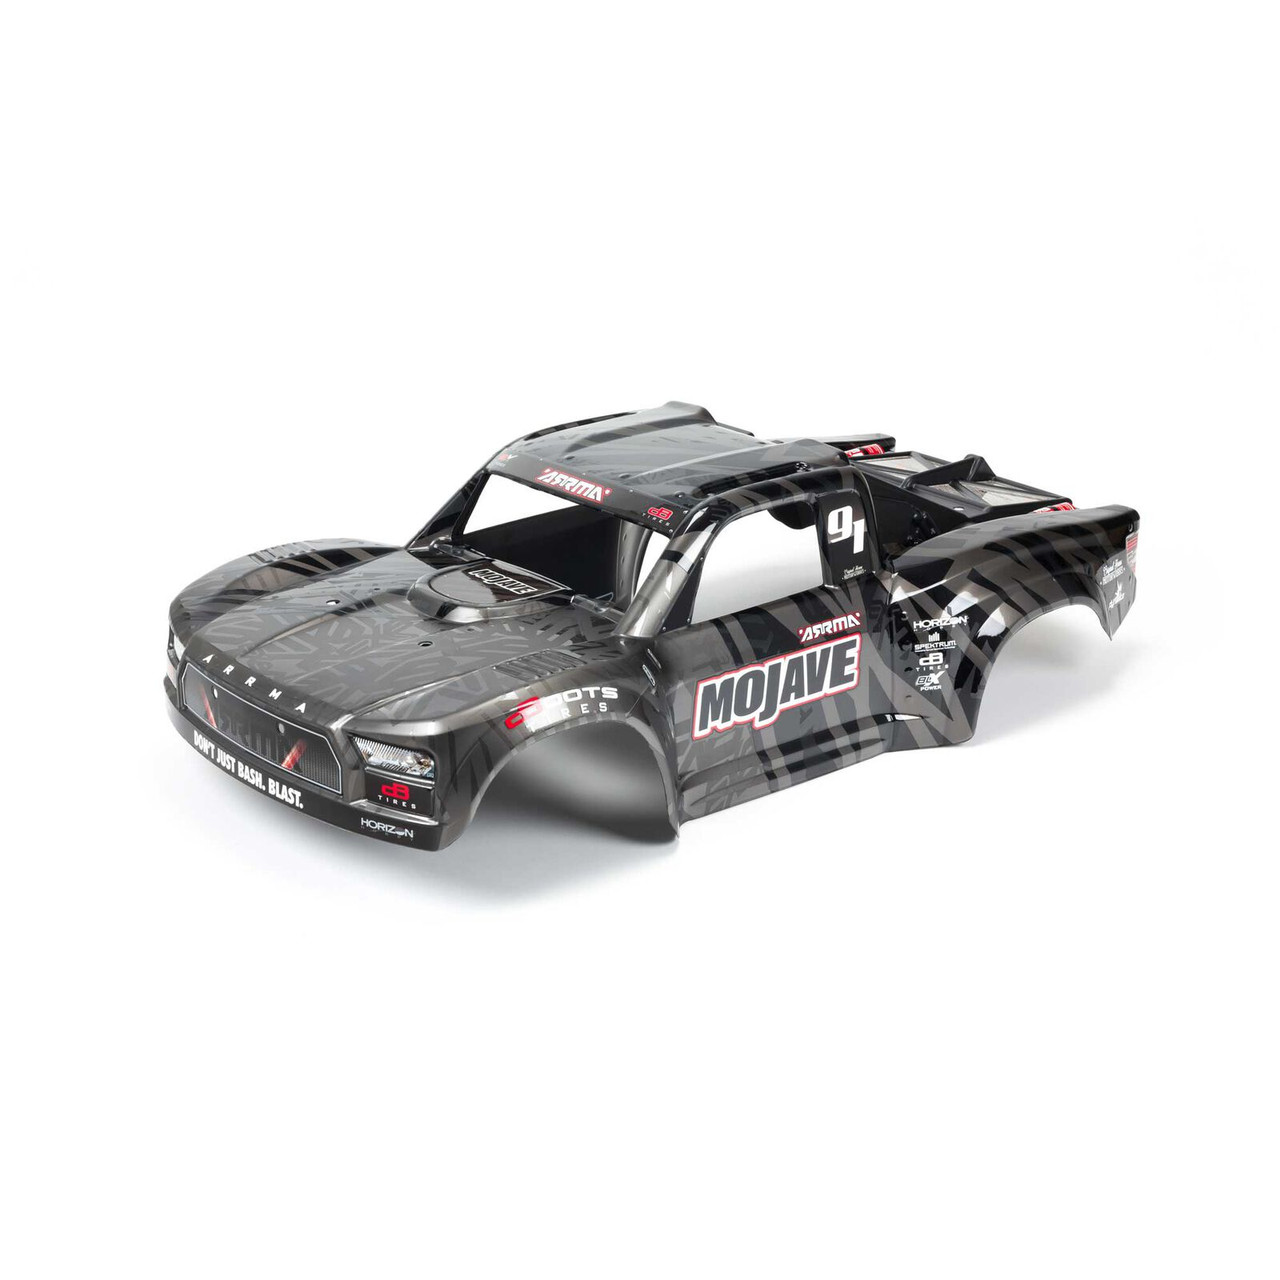 Arrma 411006 MOJAVE 1/7 EXB Painted Decaled Trimmed Body Black